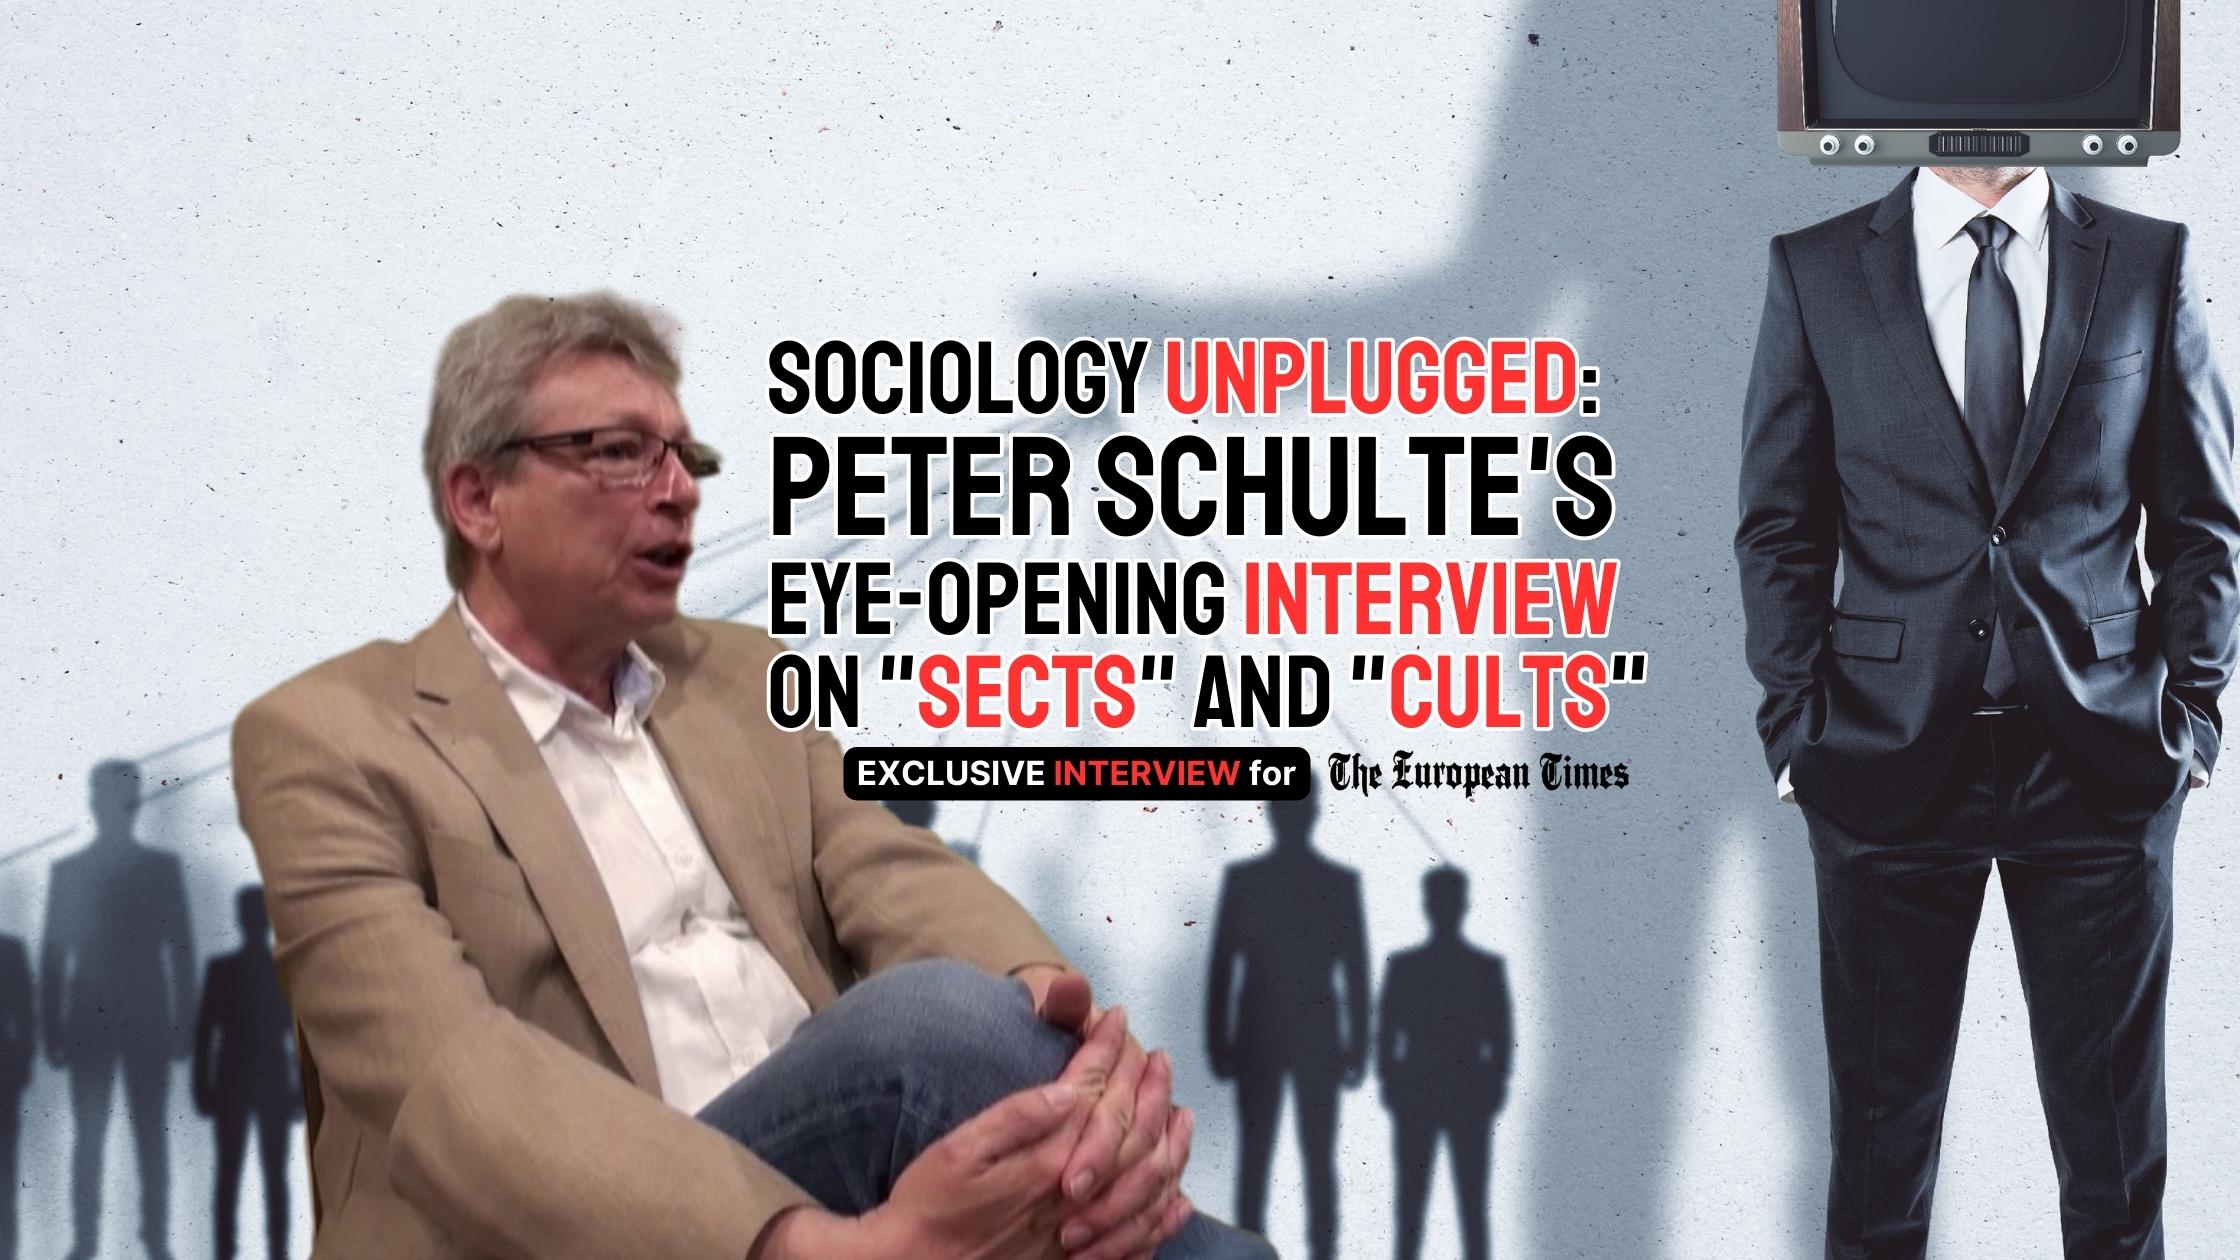 Sociology Unplugged: Peter Schulte's Eye-Opening Interview on "sects" and "cults"